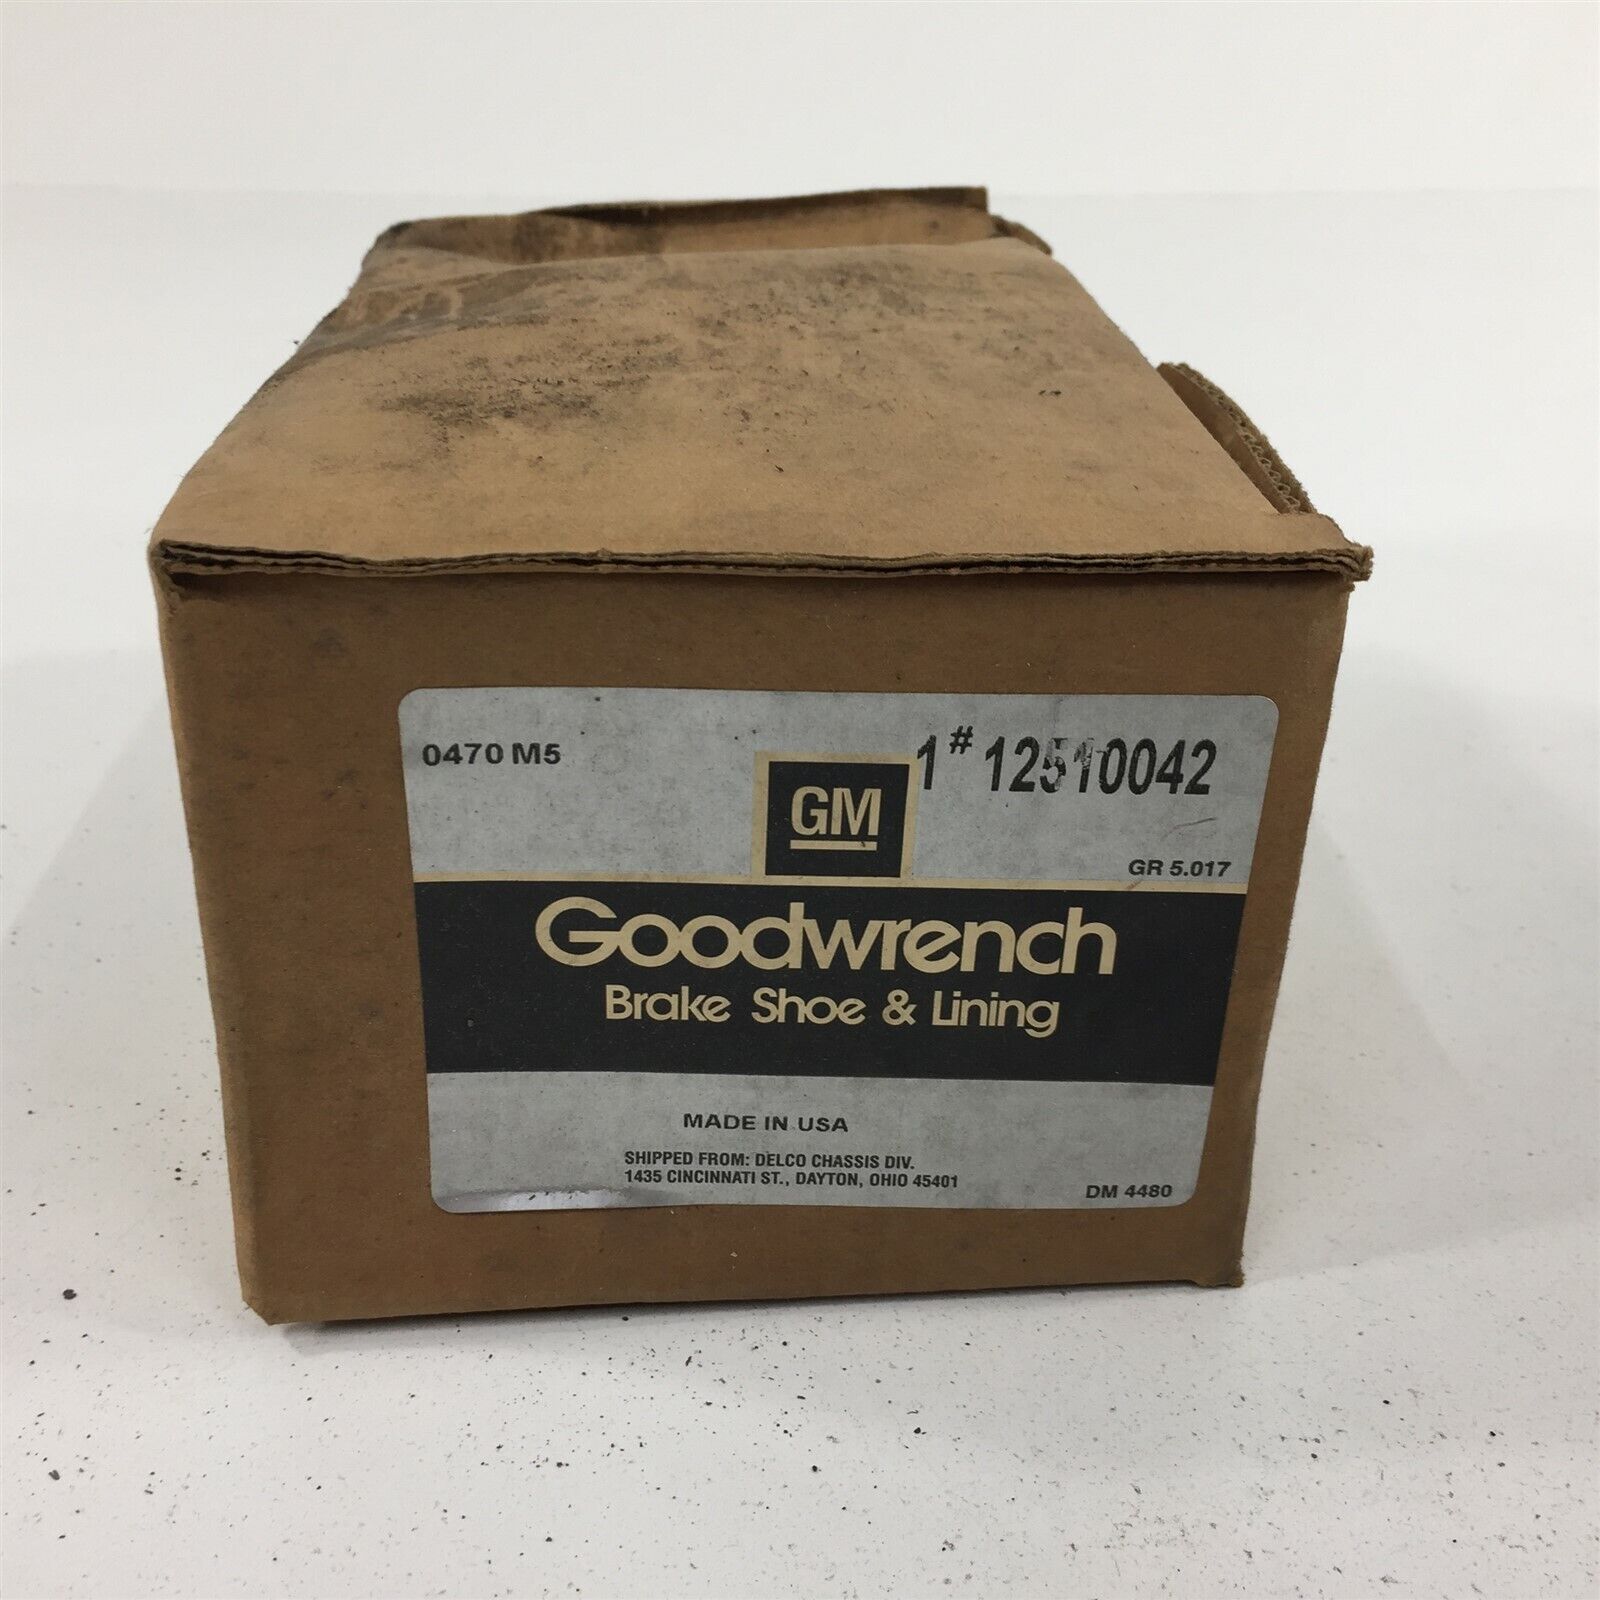 GM Goodwrench 12510042 Brake Pads - Made in USA